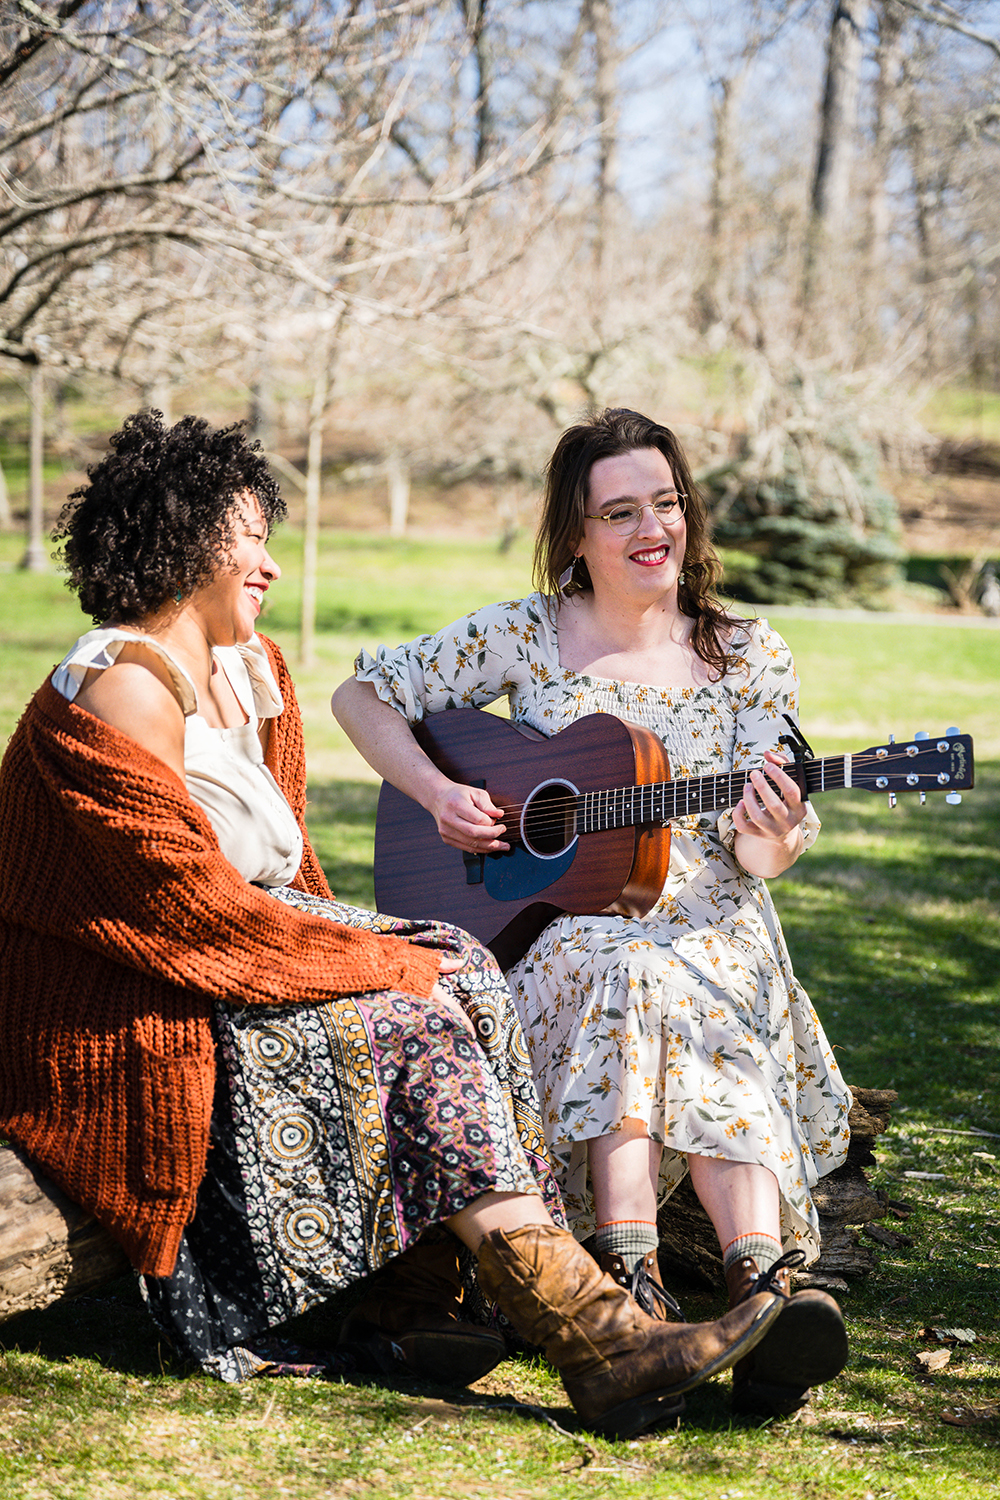 A transwoman plays a guitar and smiles as their queer partner laughs.